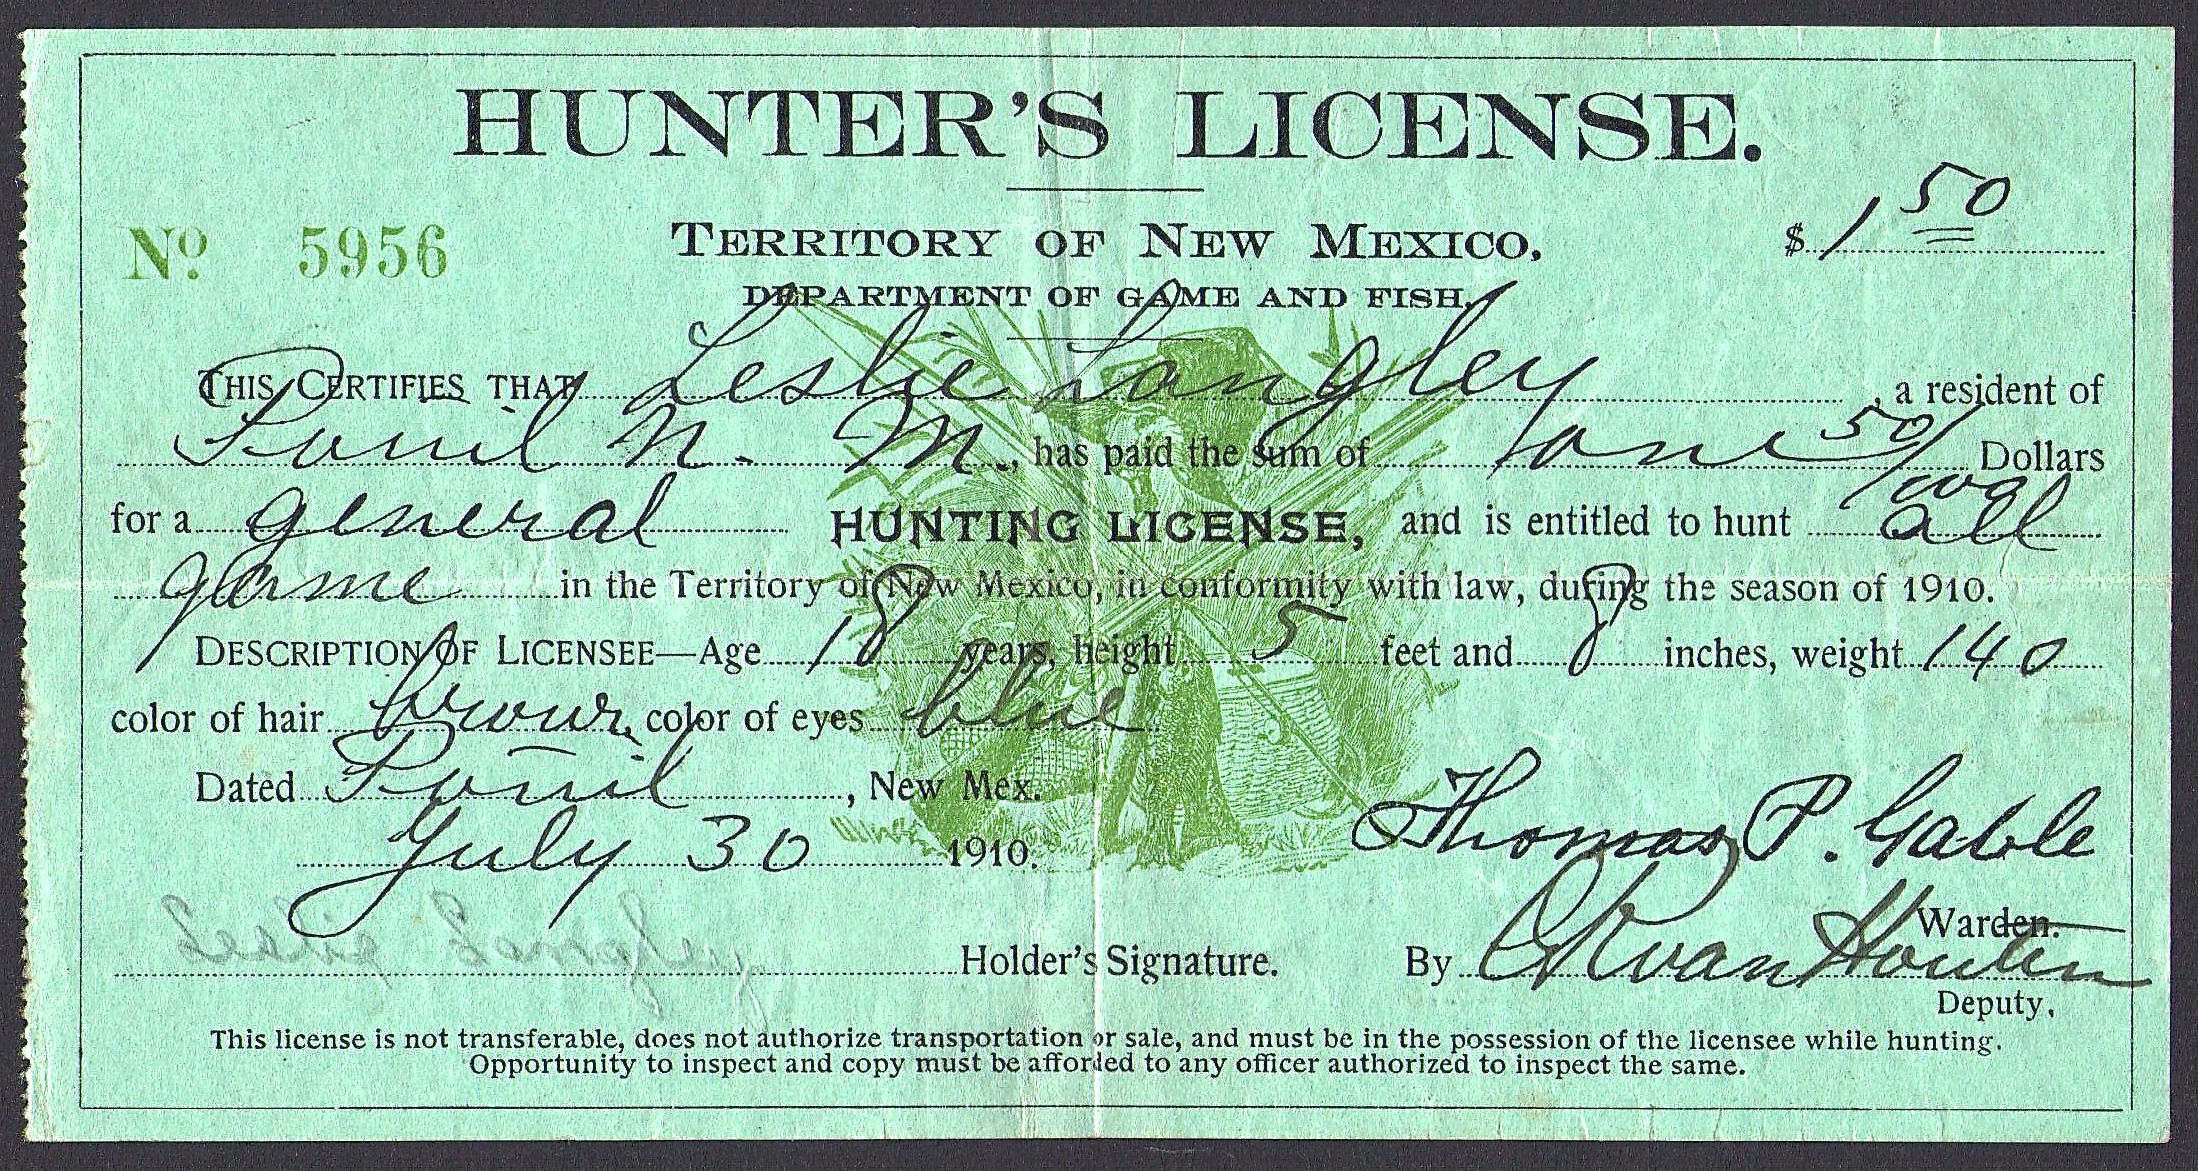 1910 Territory of New Mexico Hunter's License